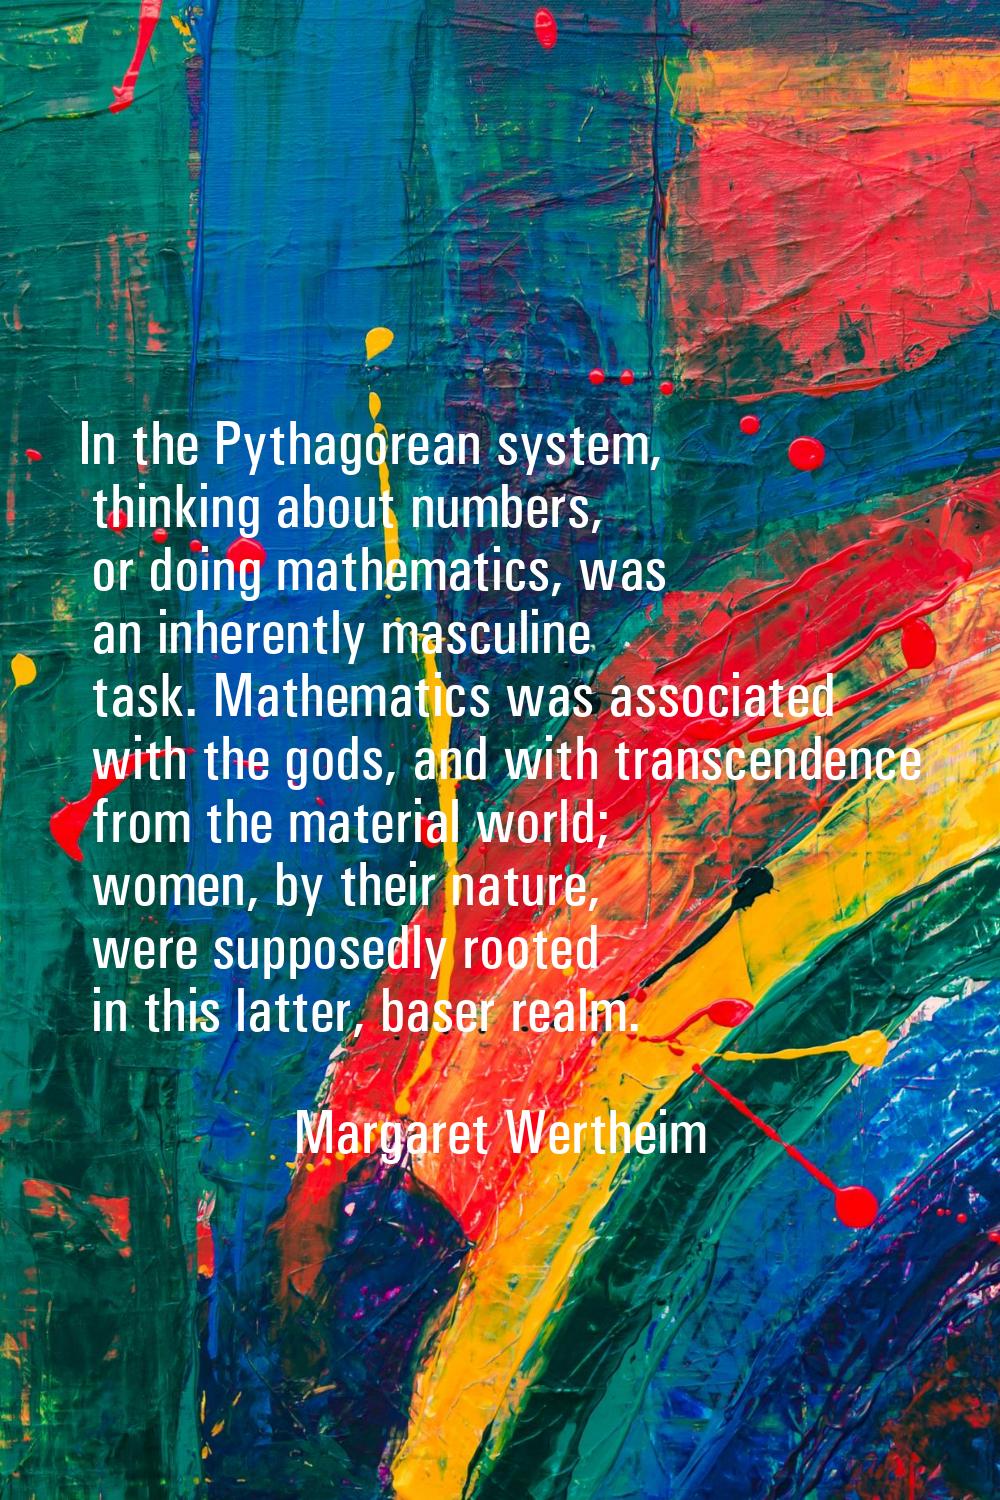 In the Pythagorean system, thinking about numbers, or doing mathematics, was an inherently masculin